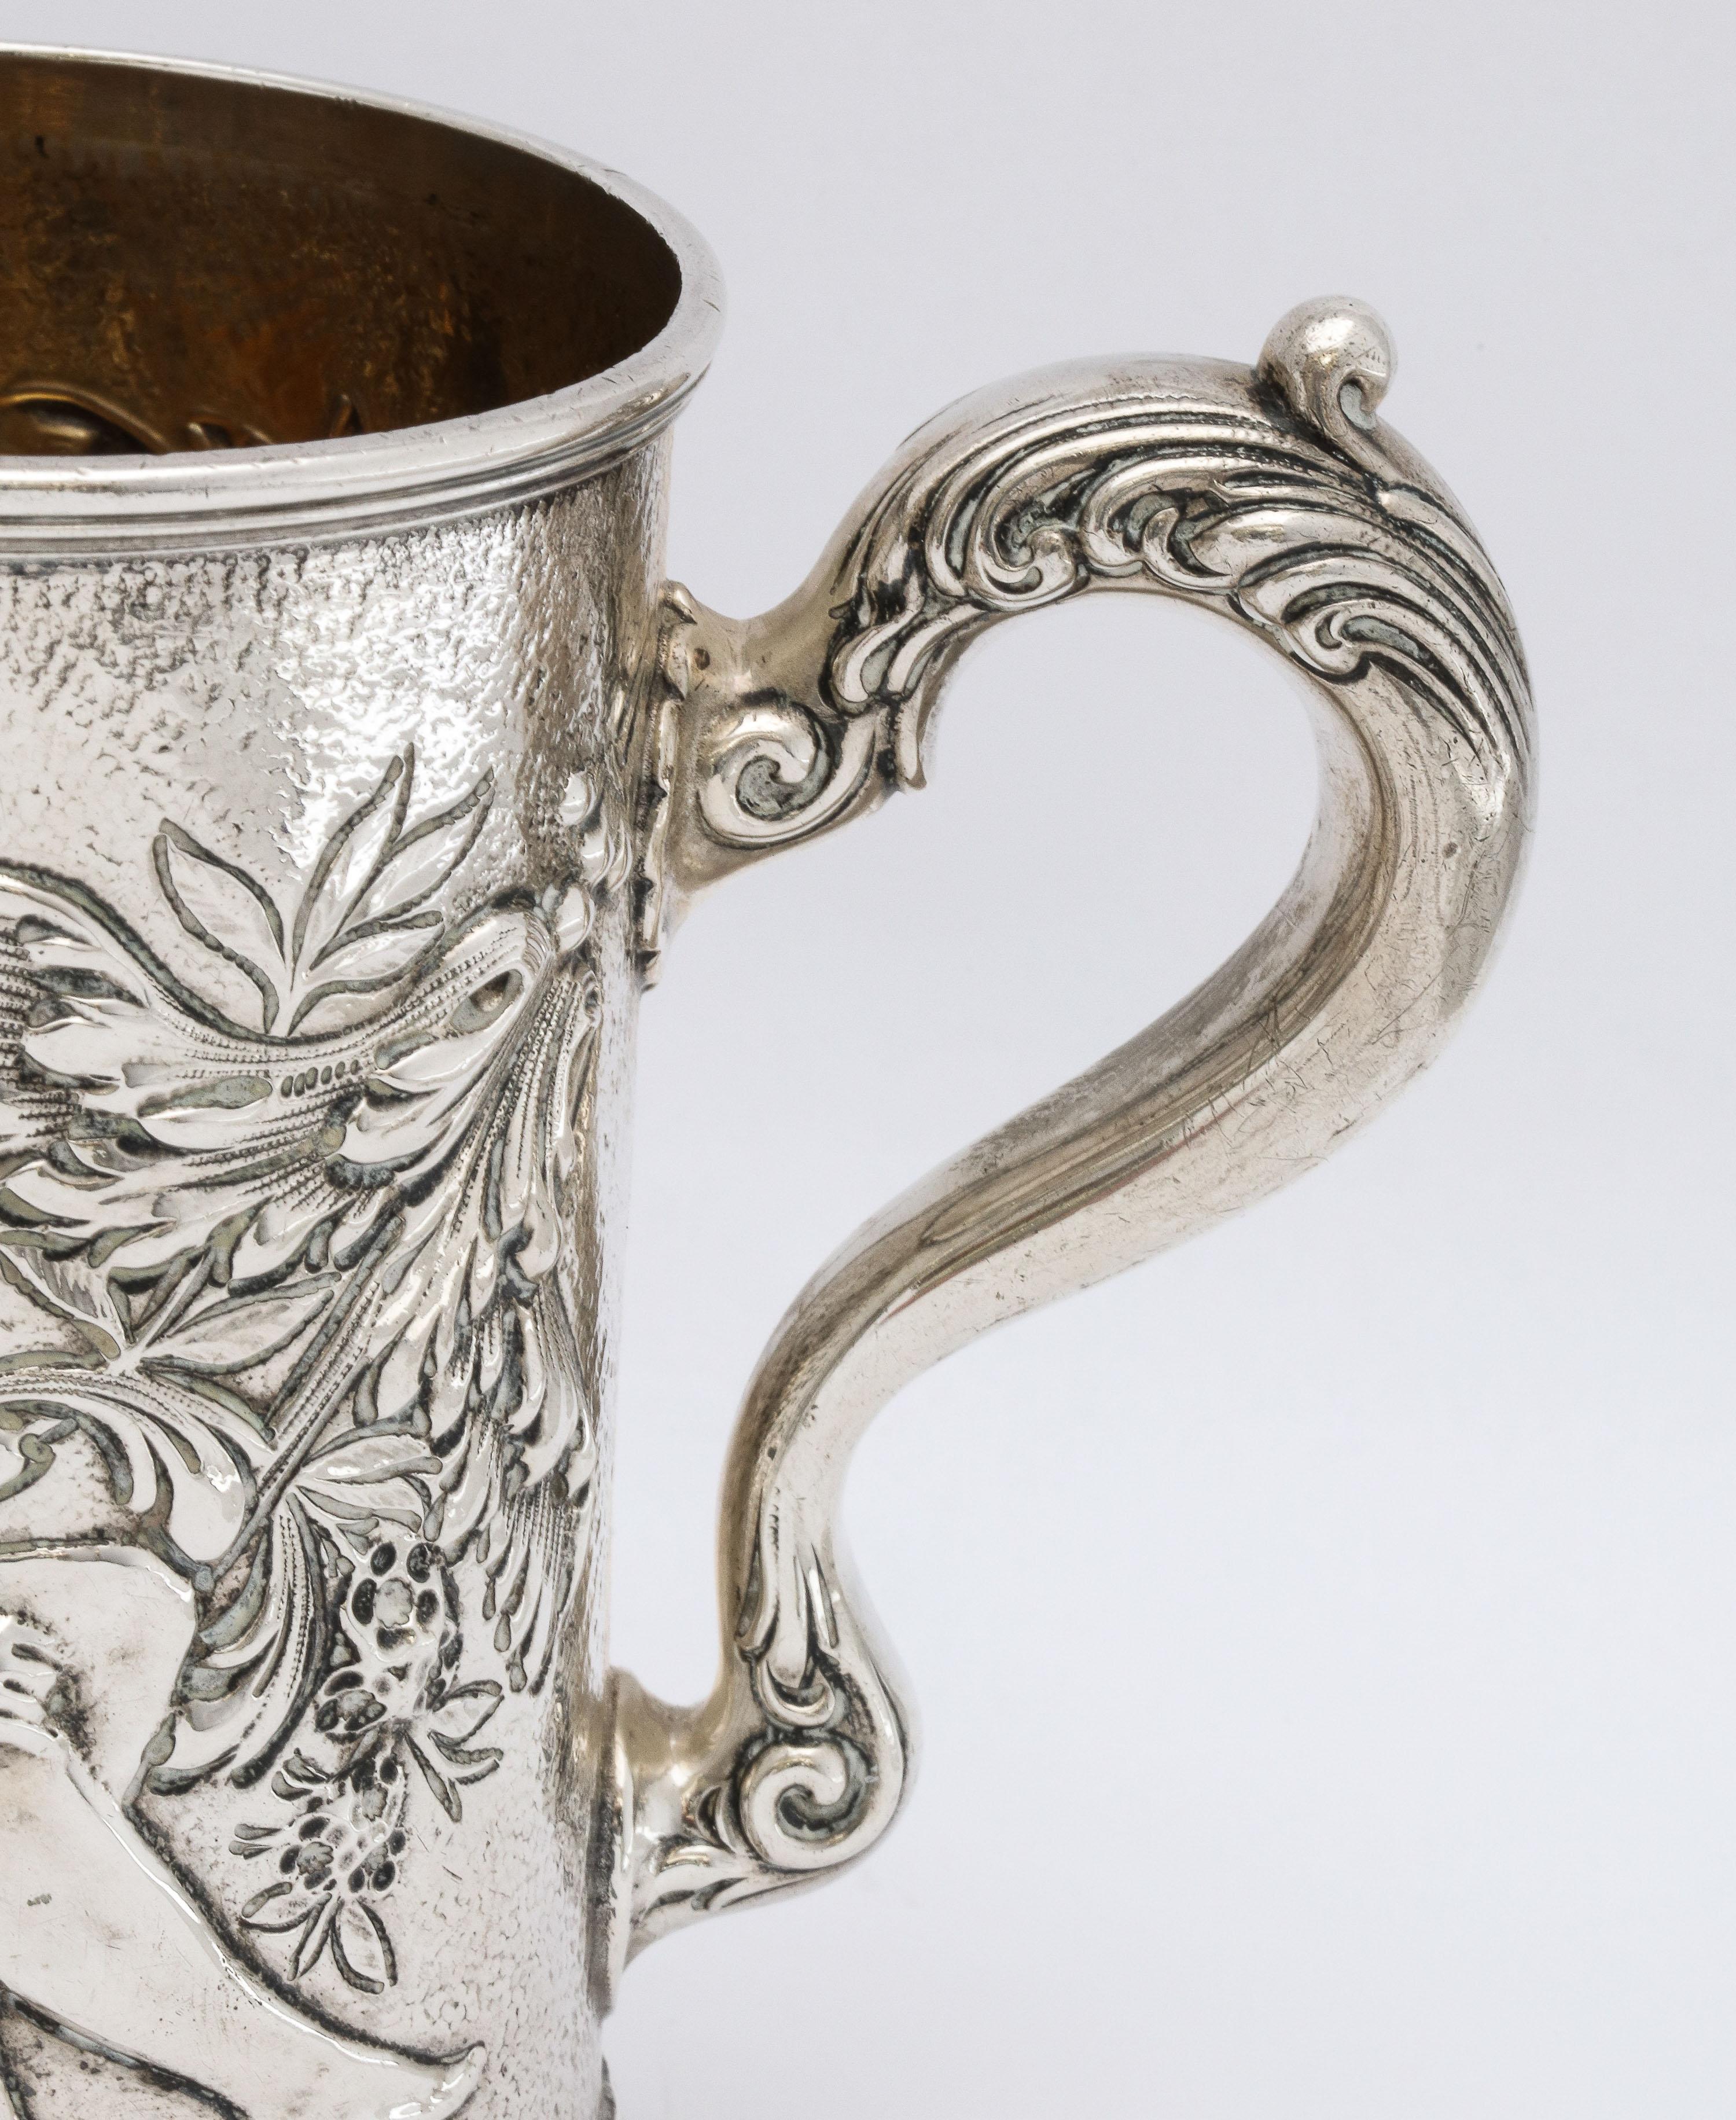 Late 19th Century Neoclassical Sterling Silver Mug/Cup by The Whiting Mfg. Co. For Sale